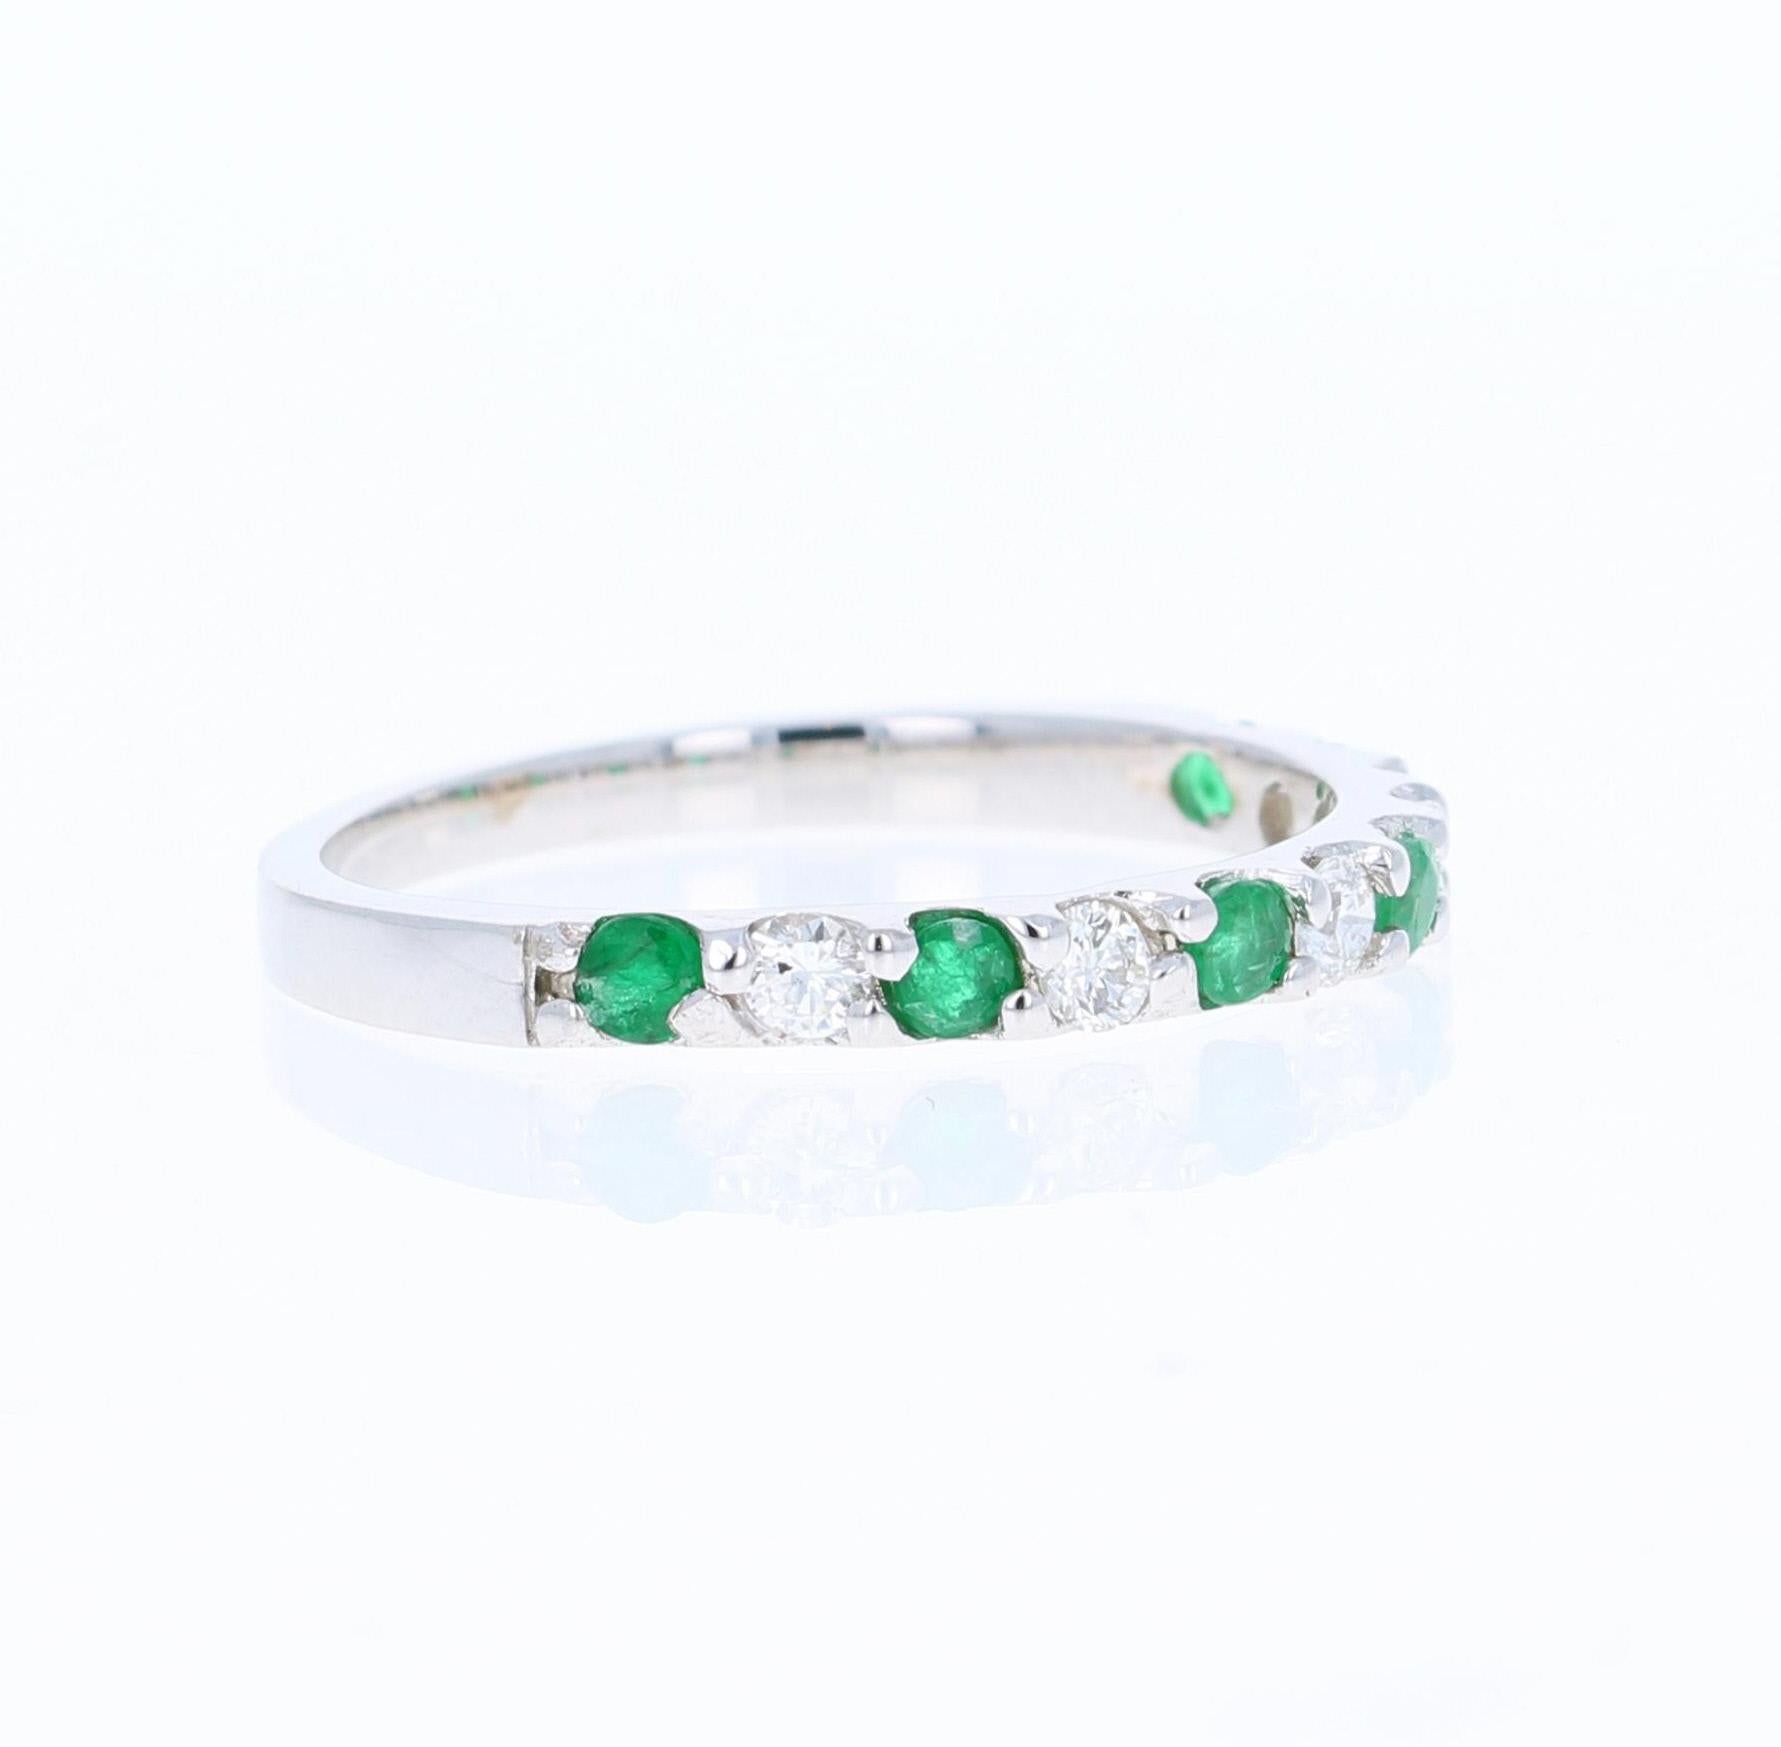 0.58 Carat Emerald and Diamond 14K White Gold Band

This is a classic Band that is a must-have!
It has 6 Emeralds that weigh 0.30 Carats and 7 Round Cut Diamonds that weigh 0.28 Carats. (Clarity: SI, Color: F) The Total Carat Weight of the Band is